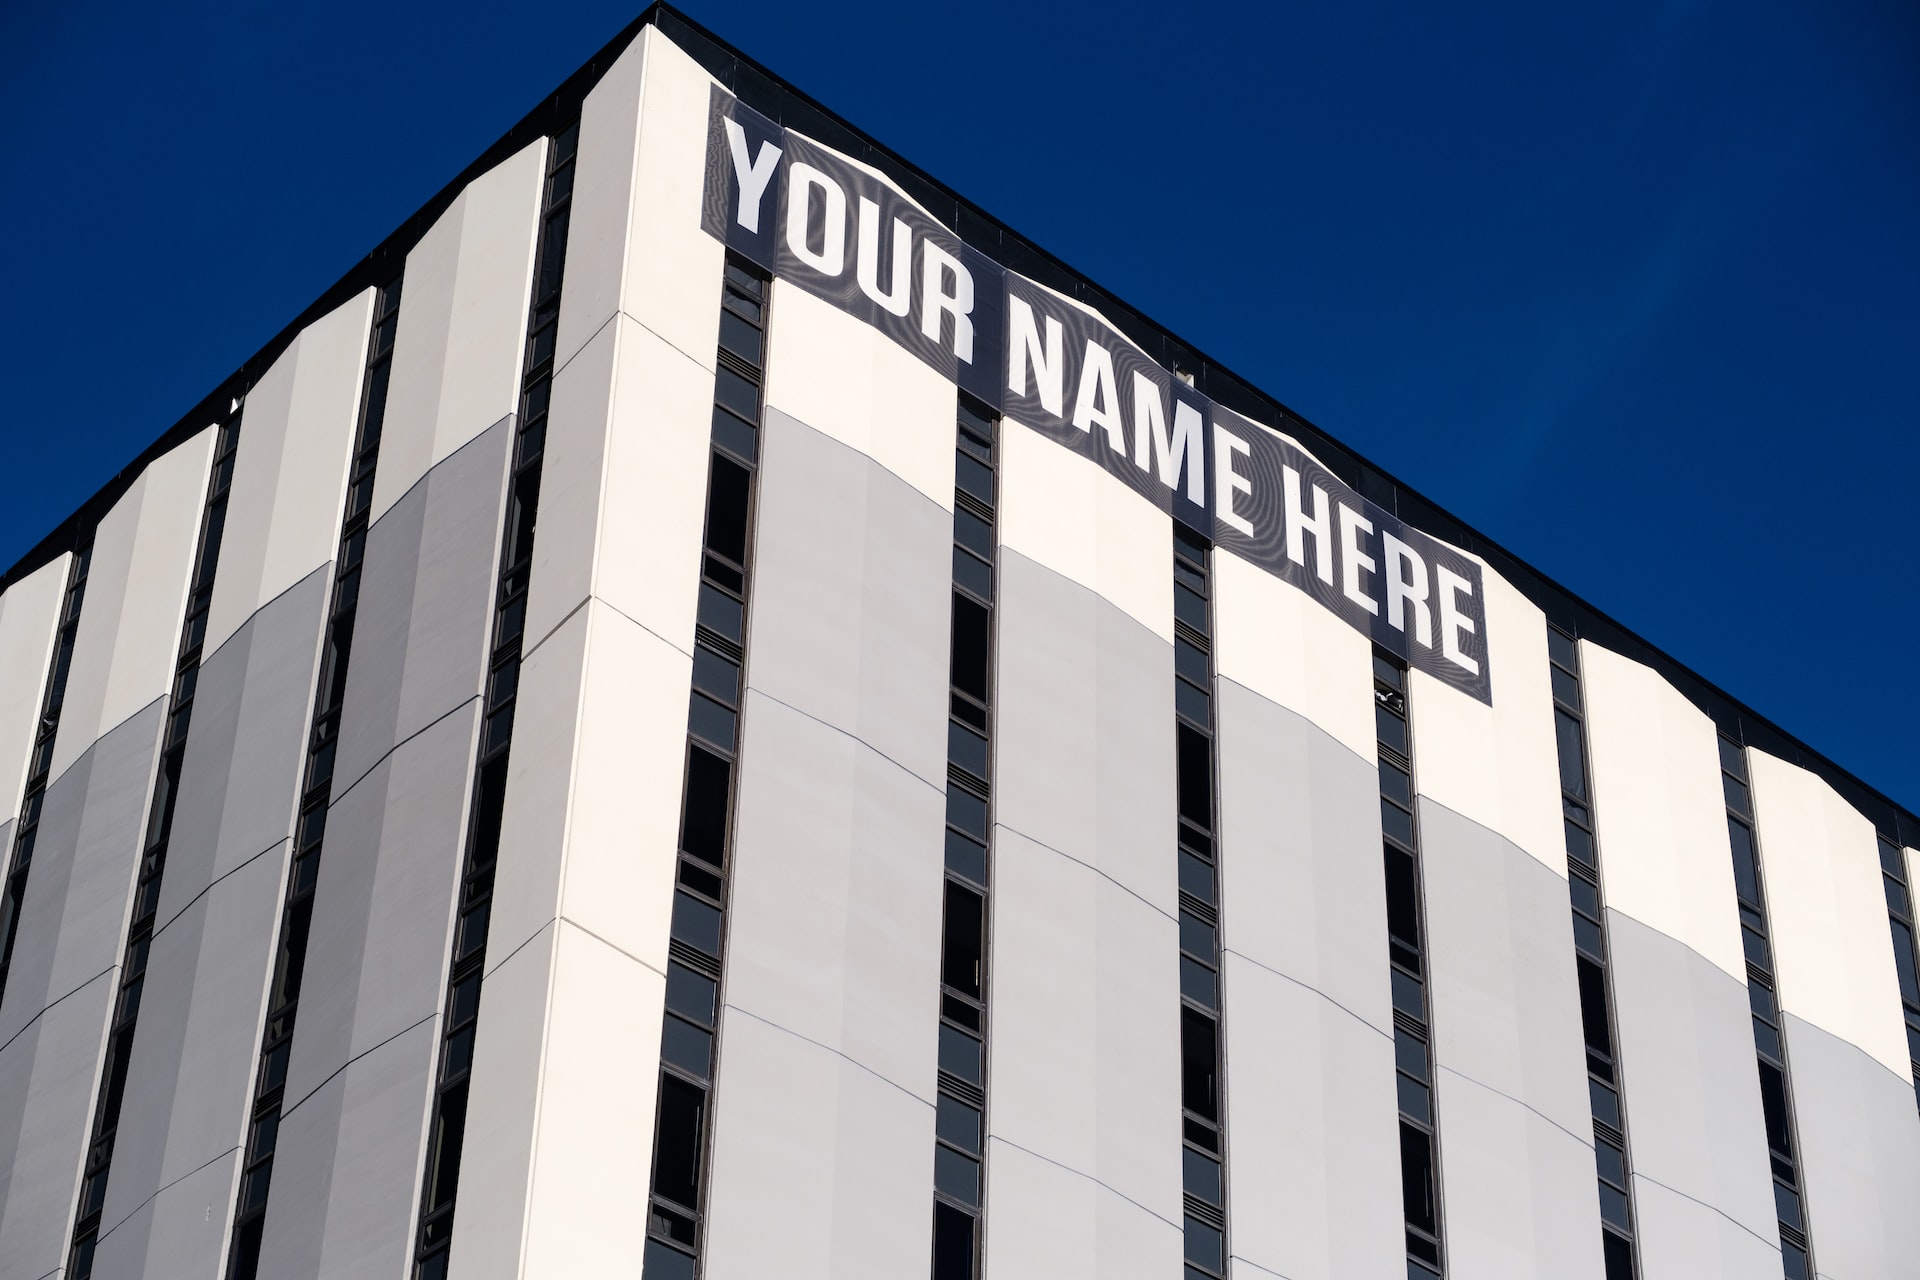 'Your Name Here' sign on building